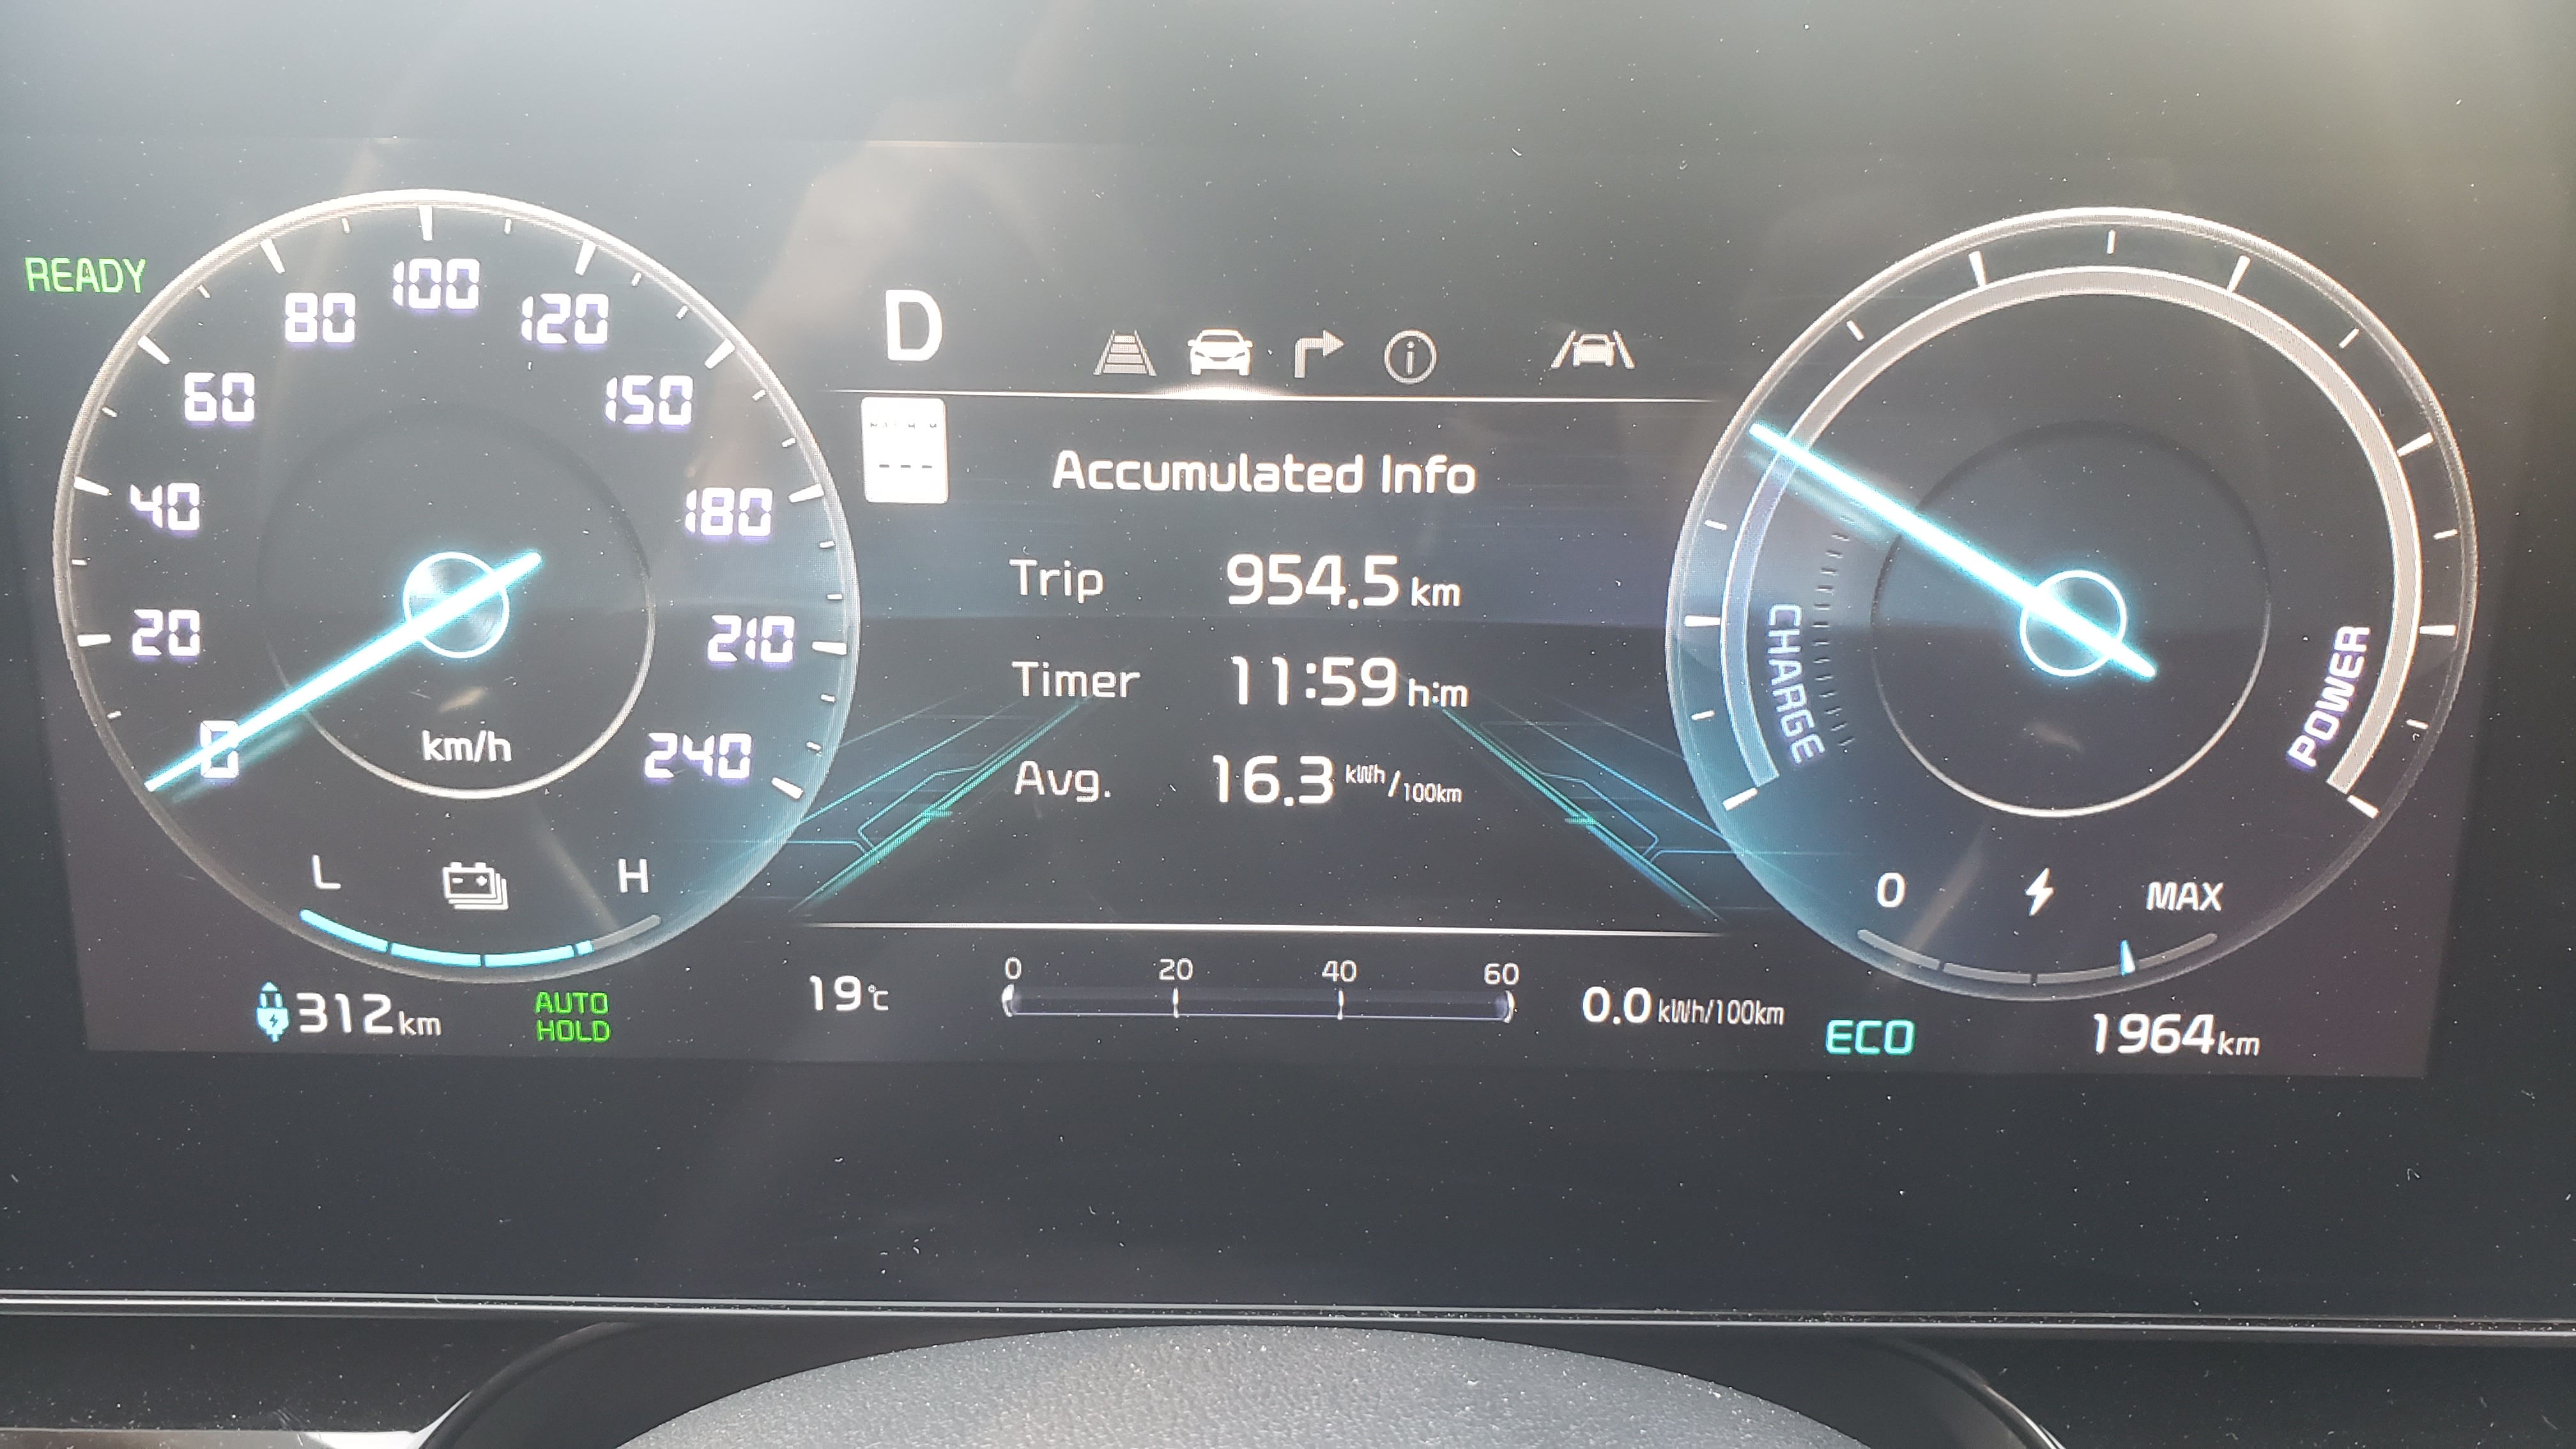 Photo of the dashboard display of my vehicle. It shows a mileage of 16.3 kWh/100 km for my road trip.